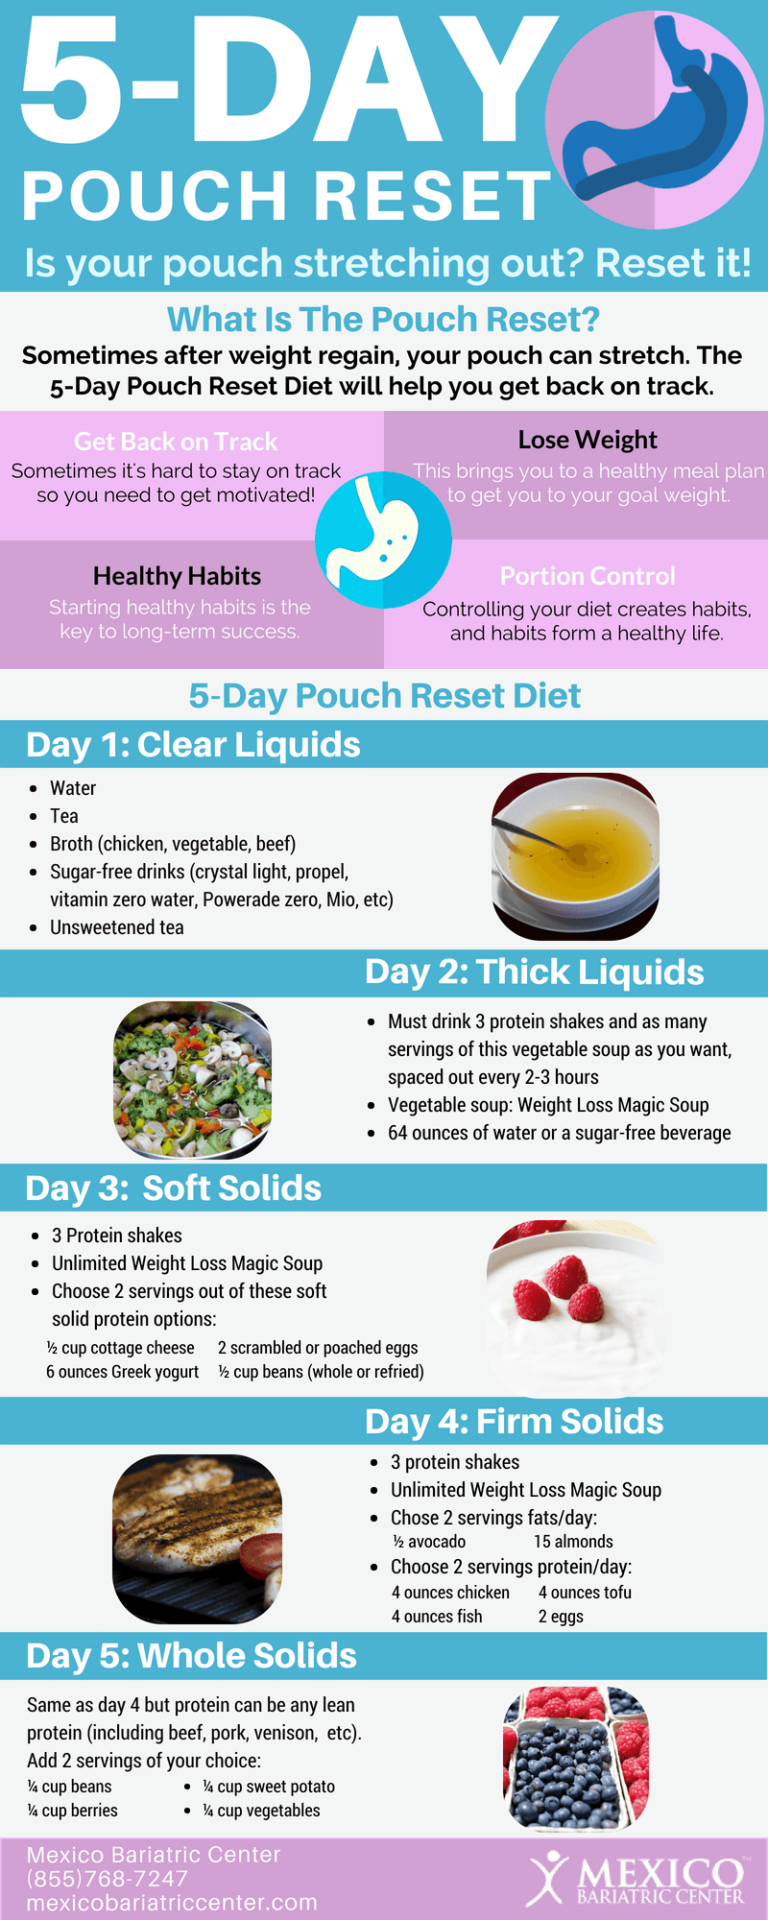 5 Day Pouch Reset Diet Infographic Pouch Reset 